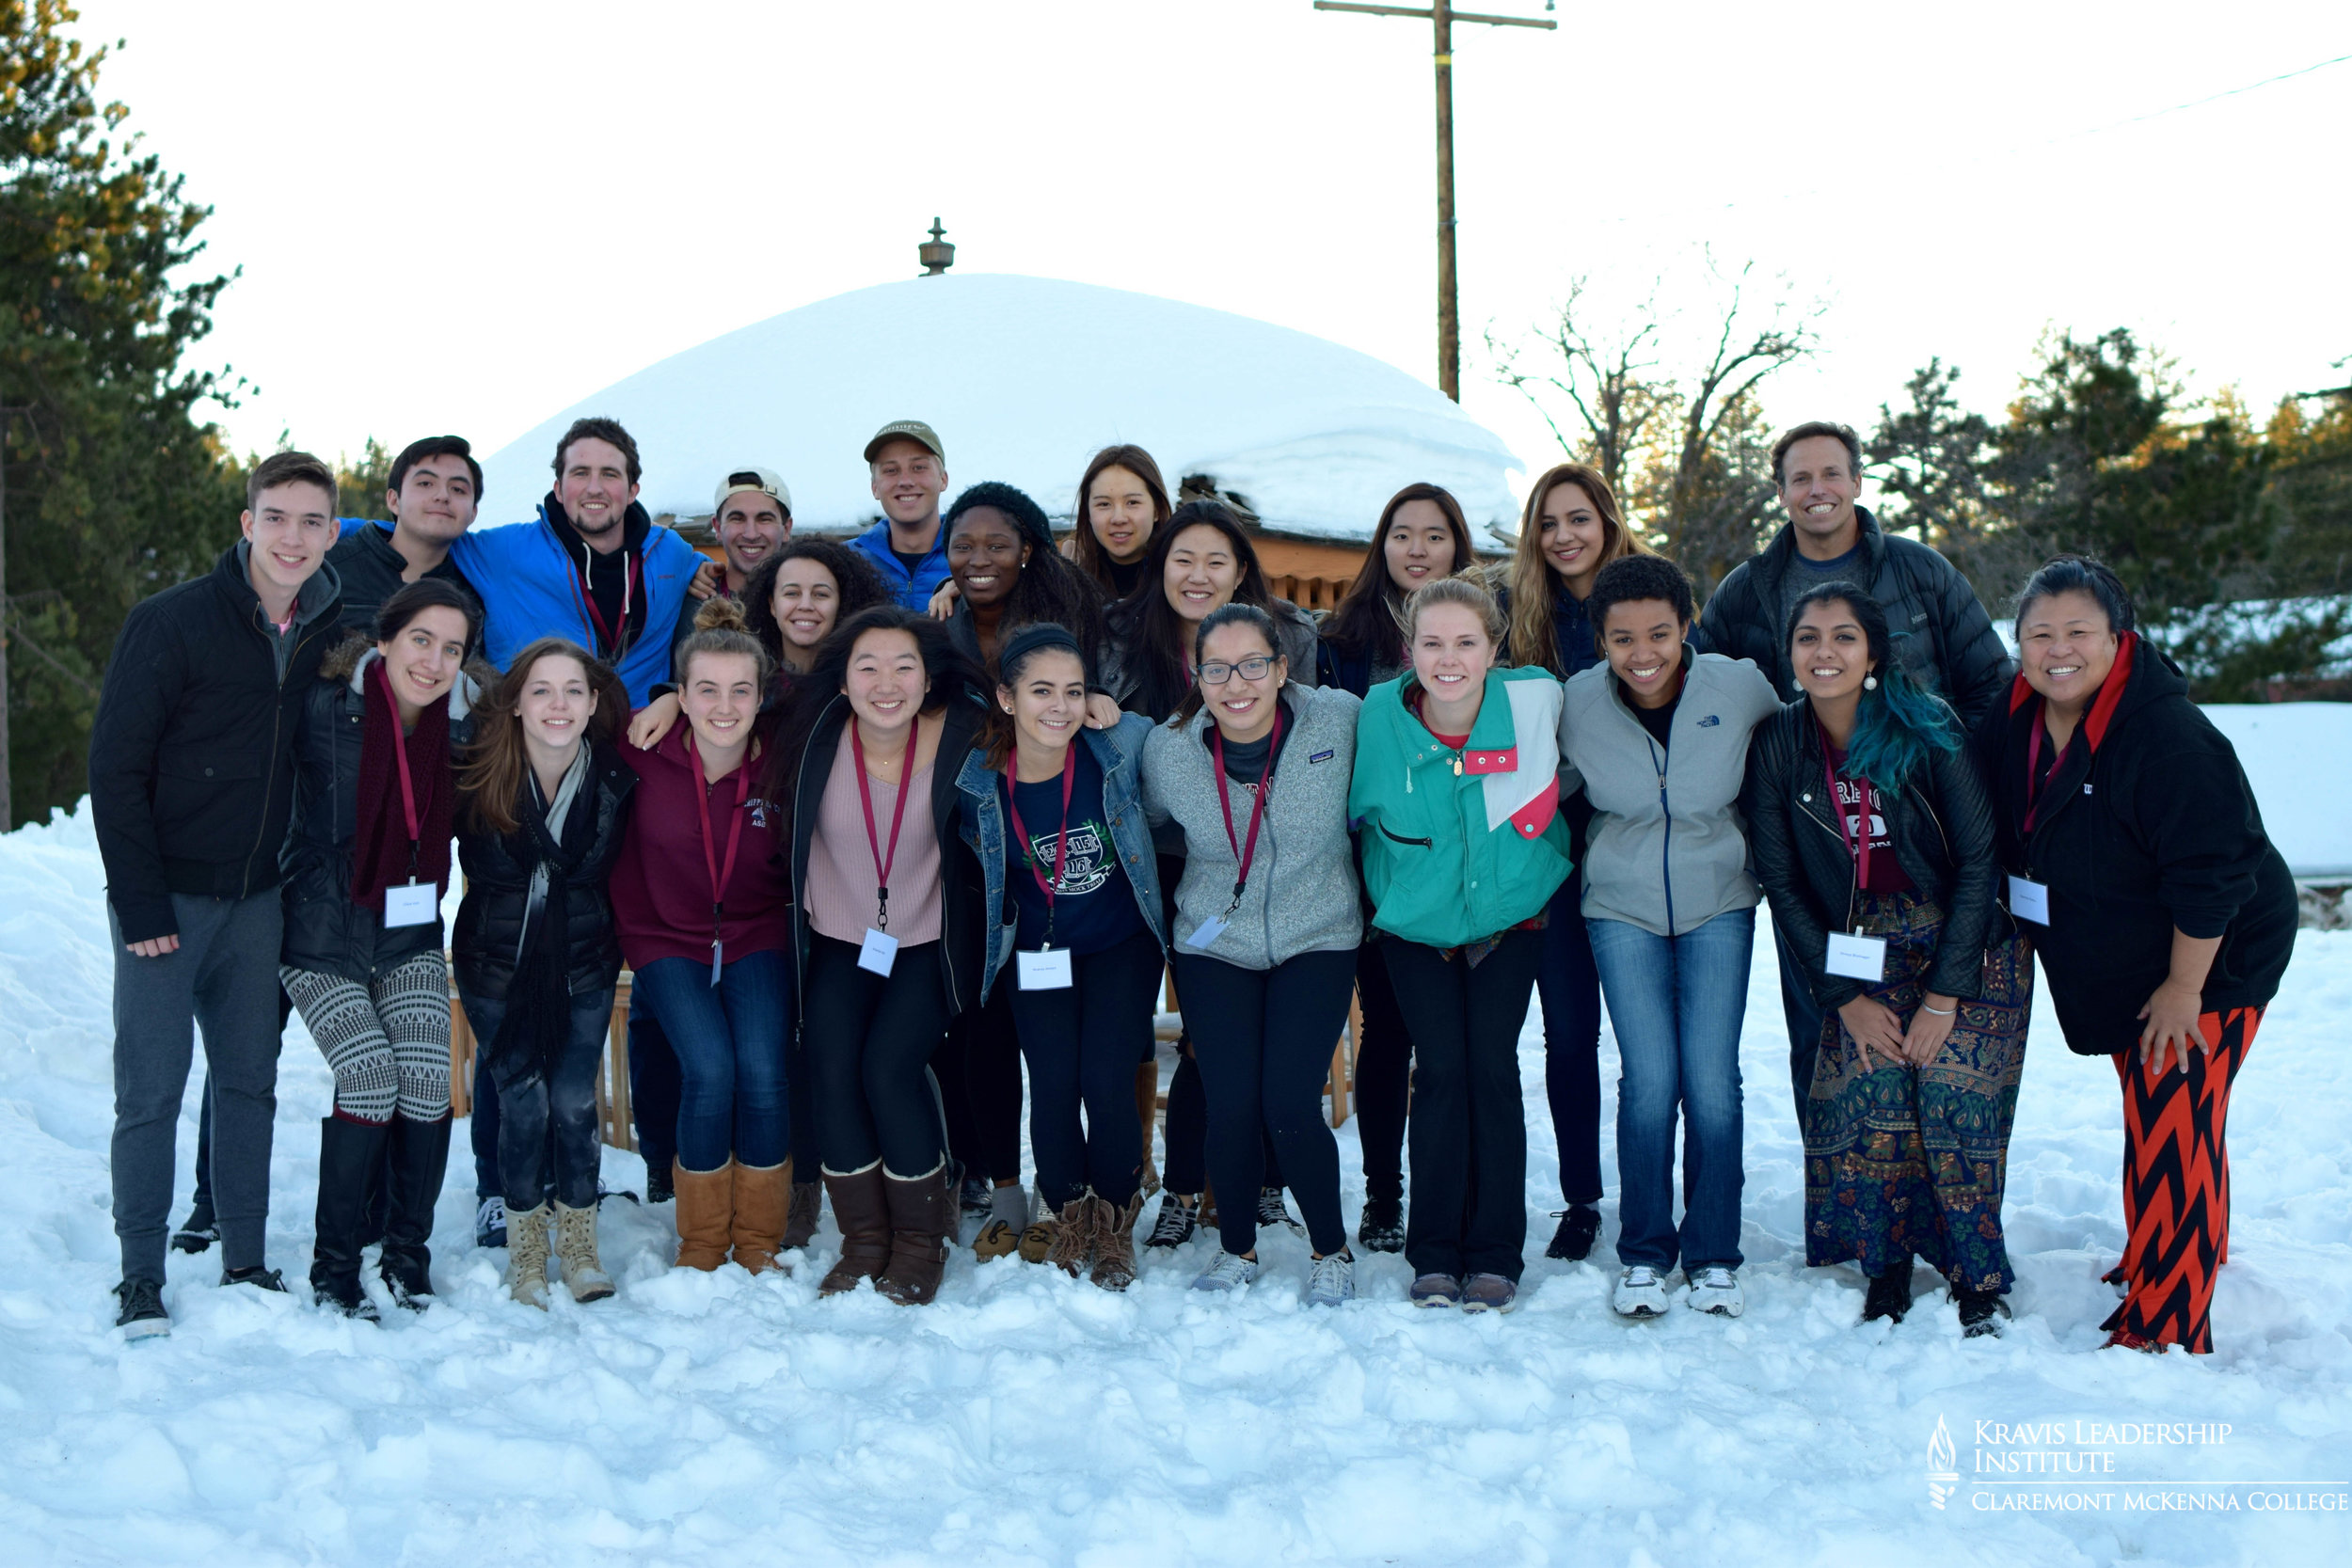   GROUP PHOTO:  of the team of students and staff that participated in the retreat.  